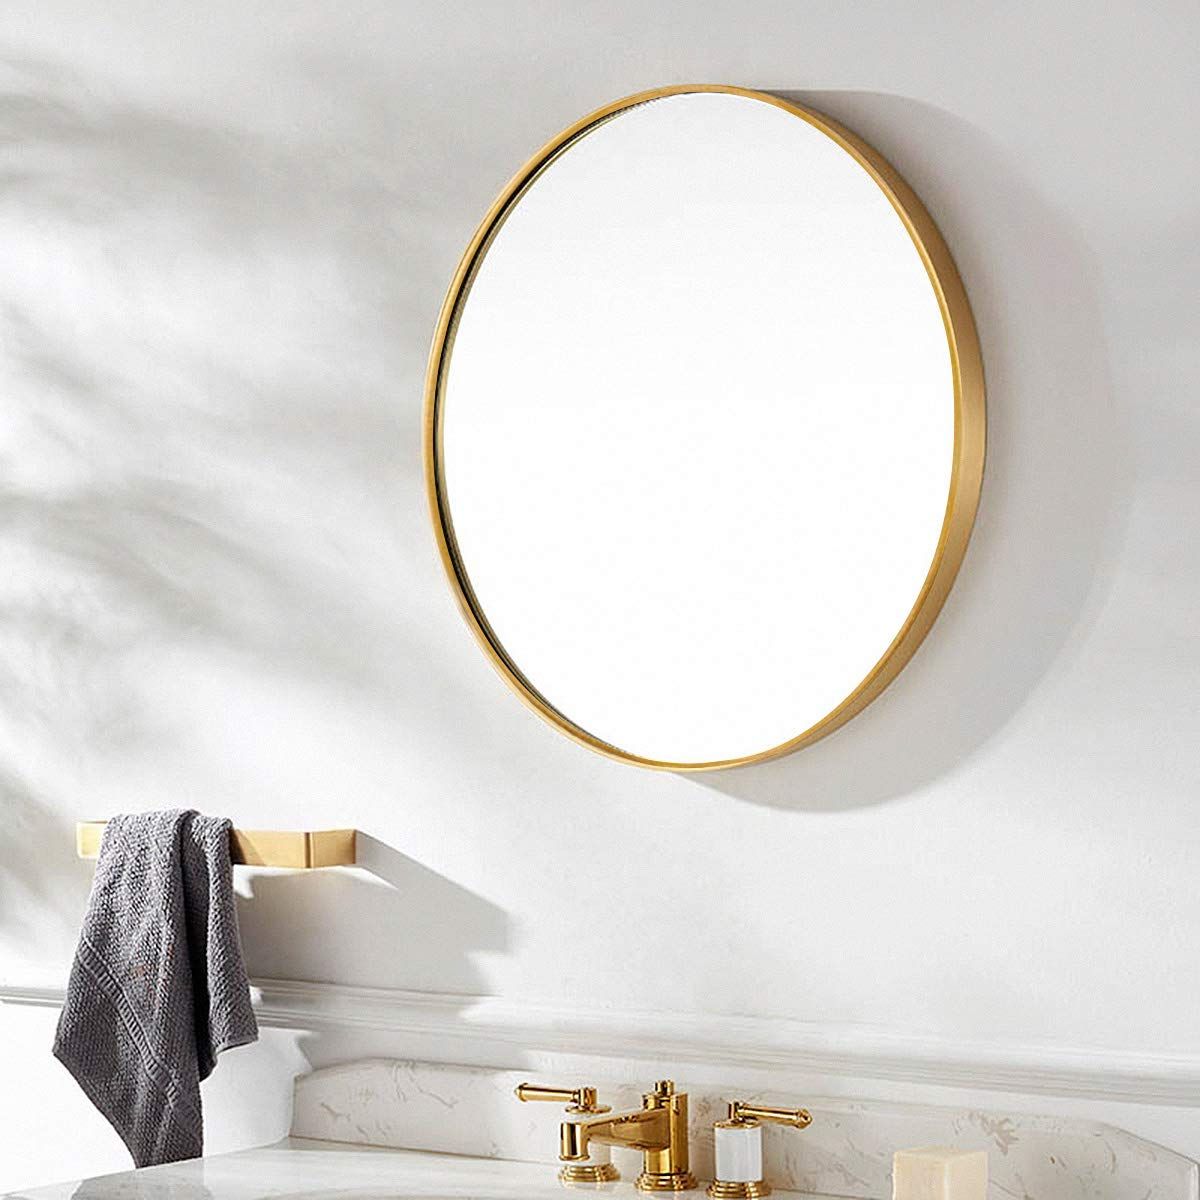 Tinytimes 23.63" Modern Metal Wall Mirror, Gold Framed Round Mirror,  Wall Mount Mirror, Home Mirrors Decor, For Bathroom, Living Rooms,  Entryways, With Well Known Round Metal Wall Mirrors (Photo 15 of 20)